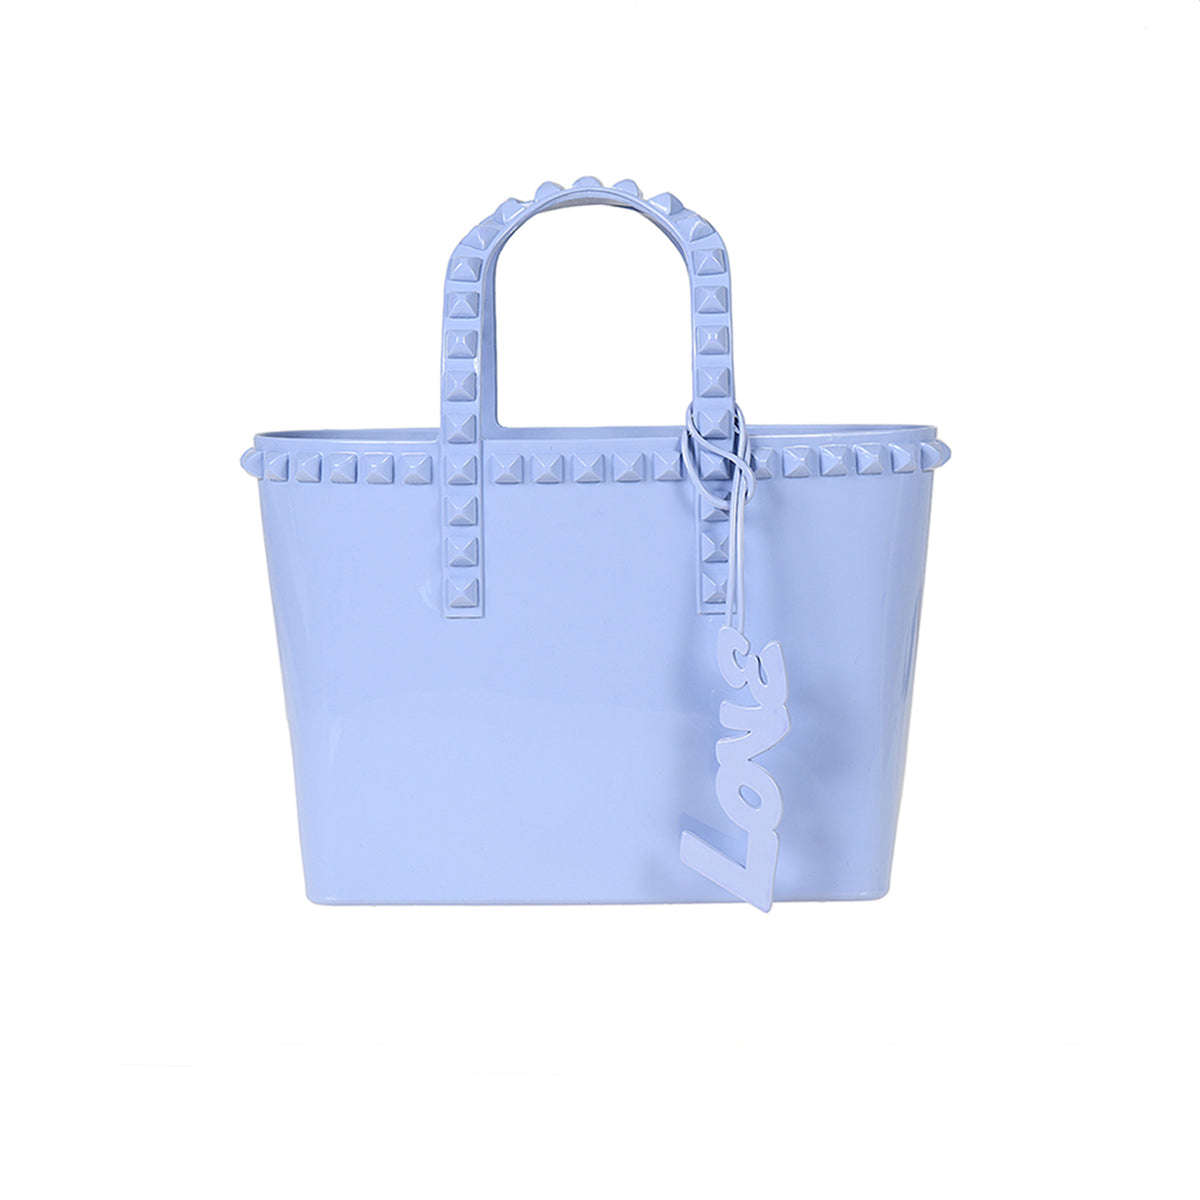 On sale with Carmen Sol micro mini jelly purse in color baby blue